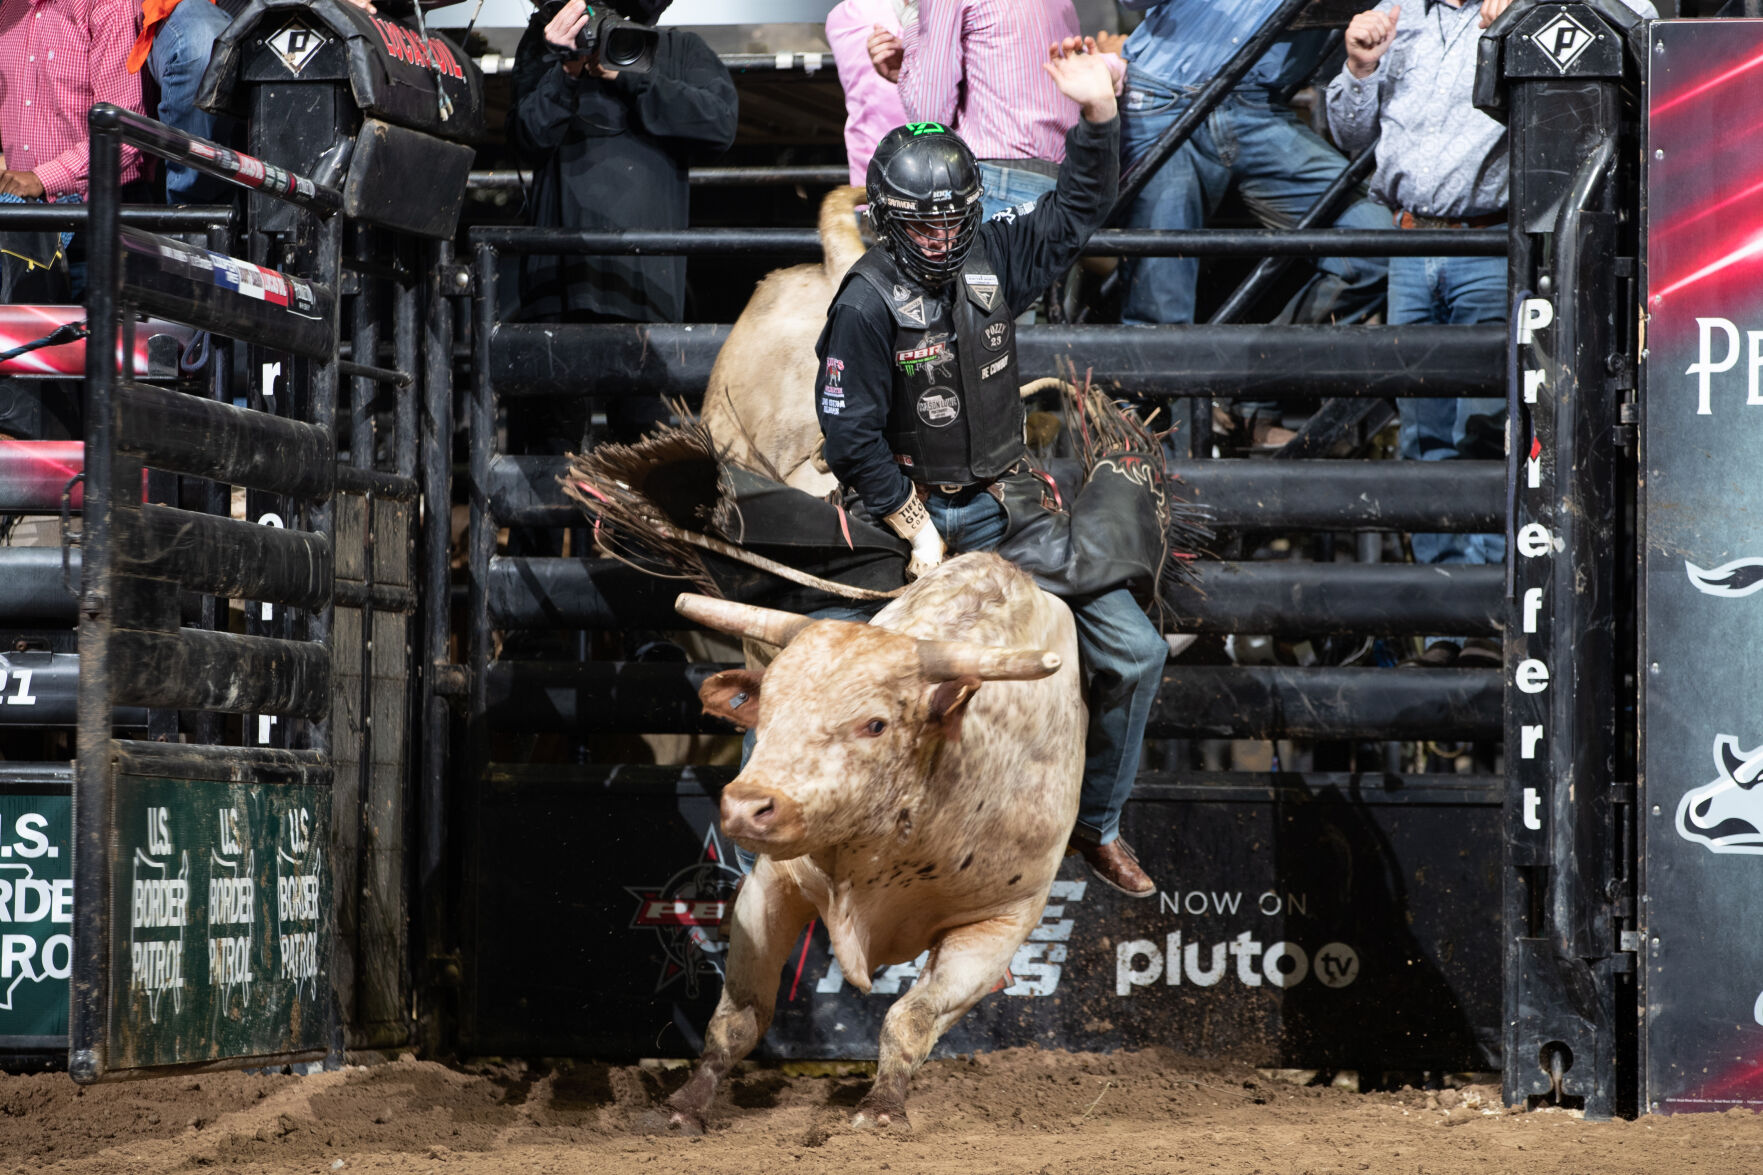 Professional bull riders to compete in Fairfax Arts and Entertainment fairfaxtimes